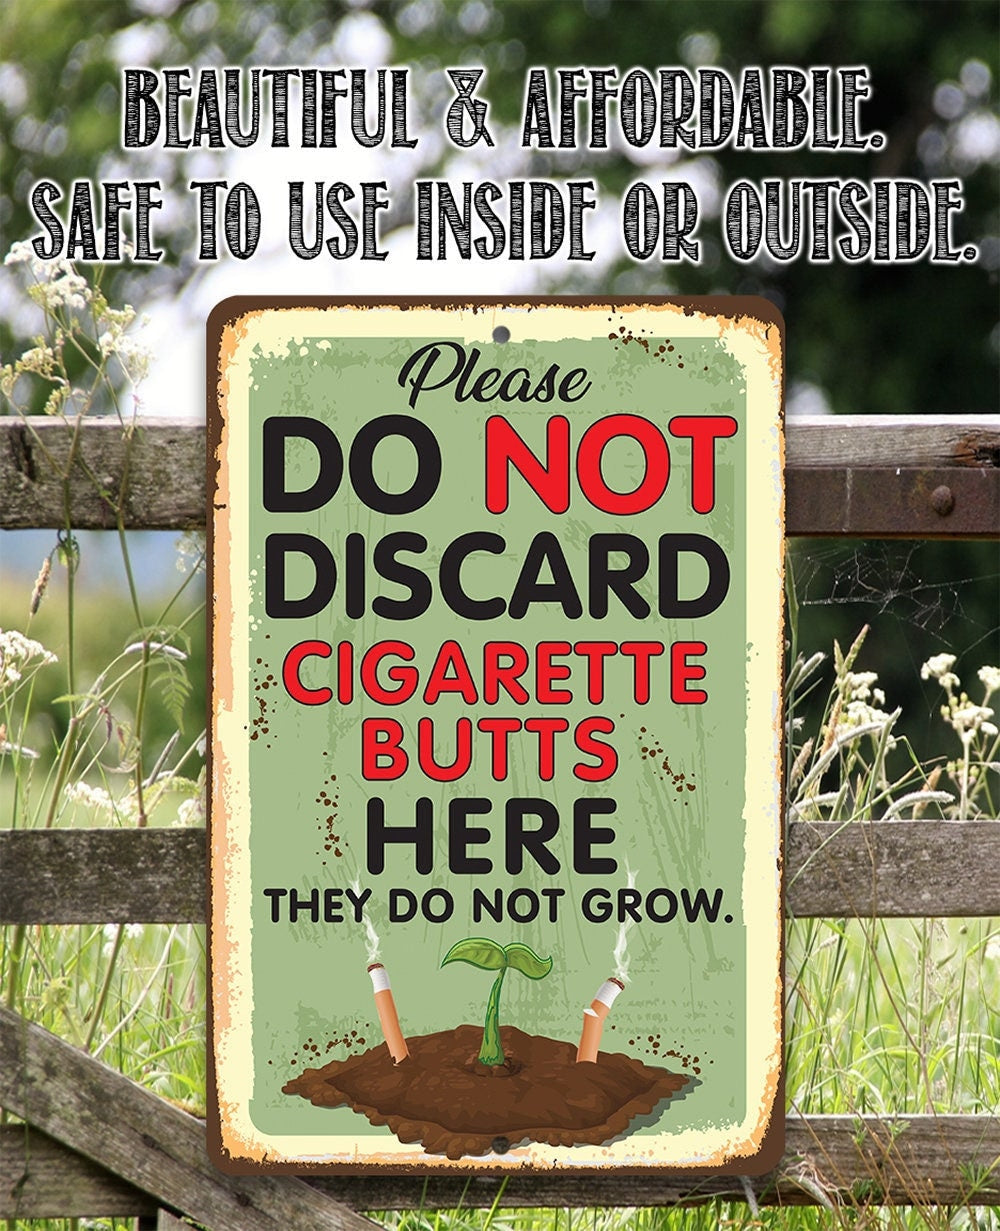 Please Do Not Discard Cigarette Butts Here They Do Not Grow - Use Indoor/Outdoor - 8" x 12" or 12" x 18" Aluminum Tin Awesome Metal Poster